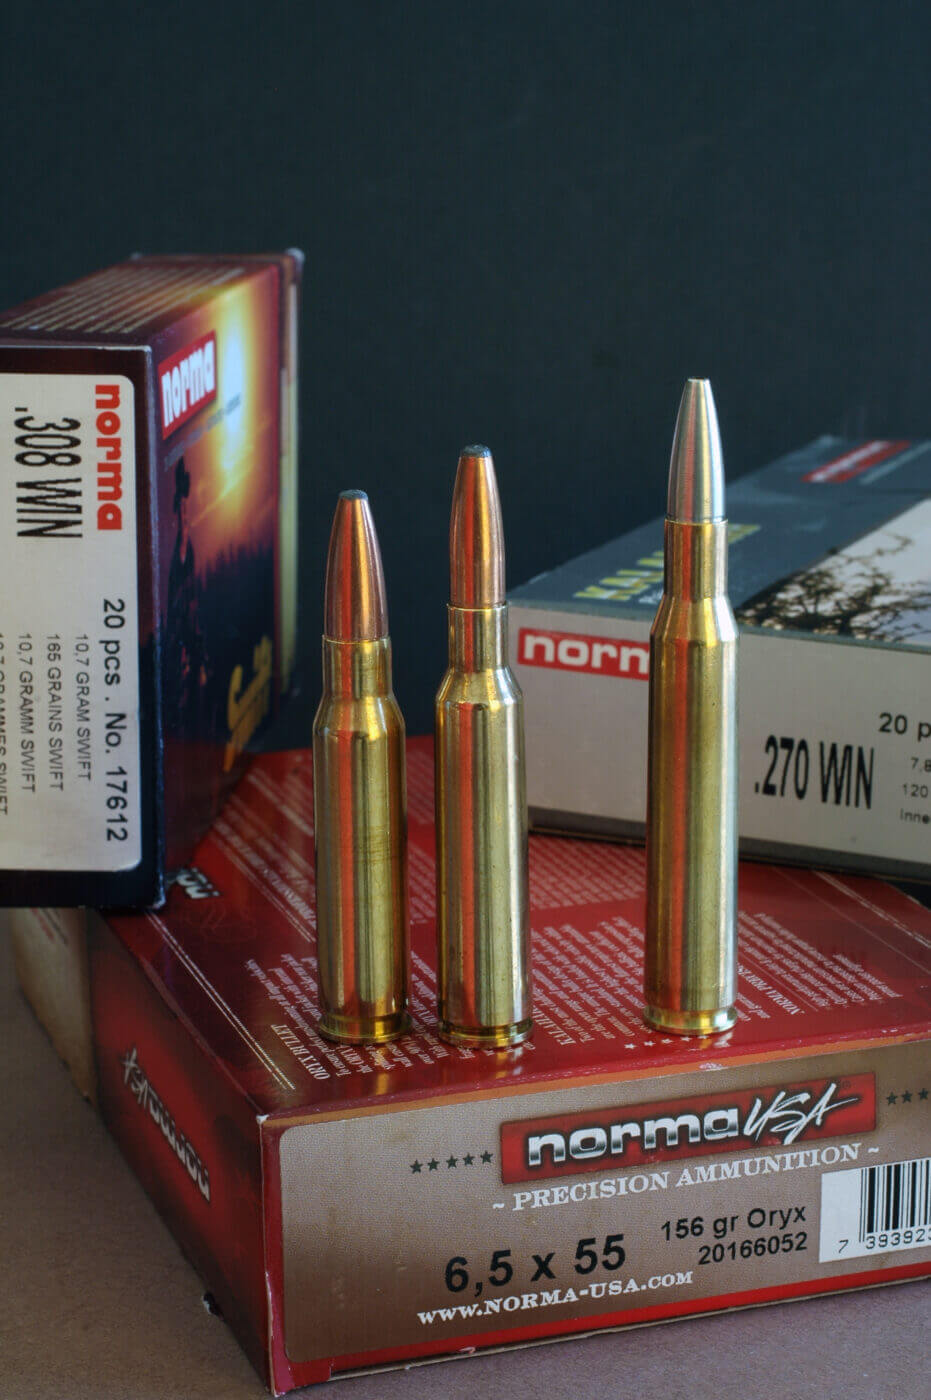 Comparing the .308 with .270 and 6.5x55